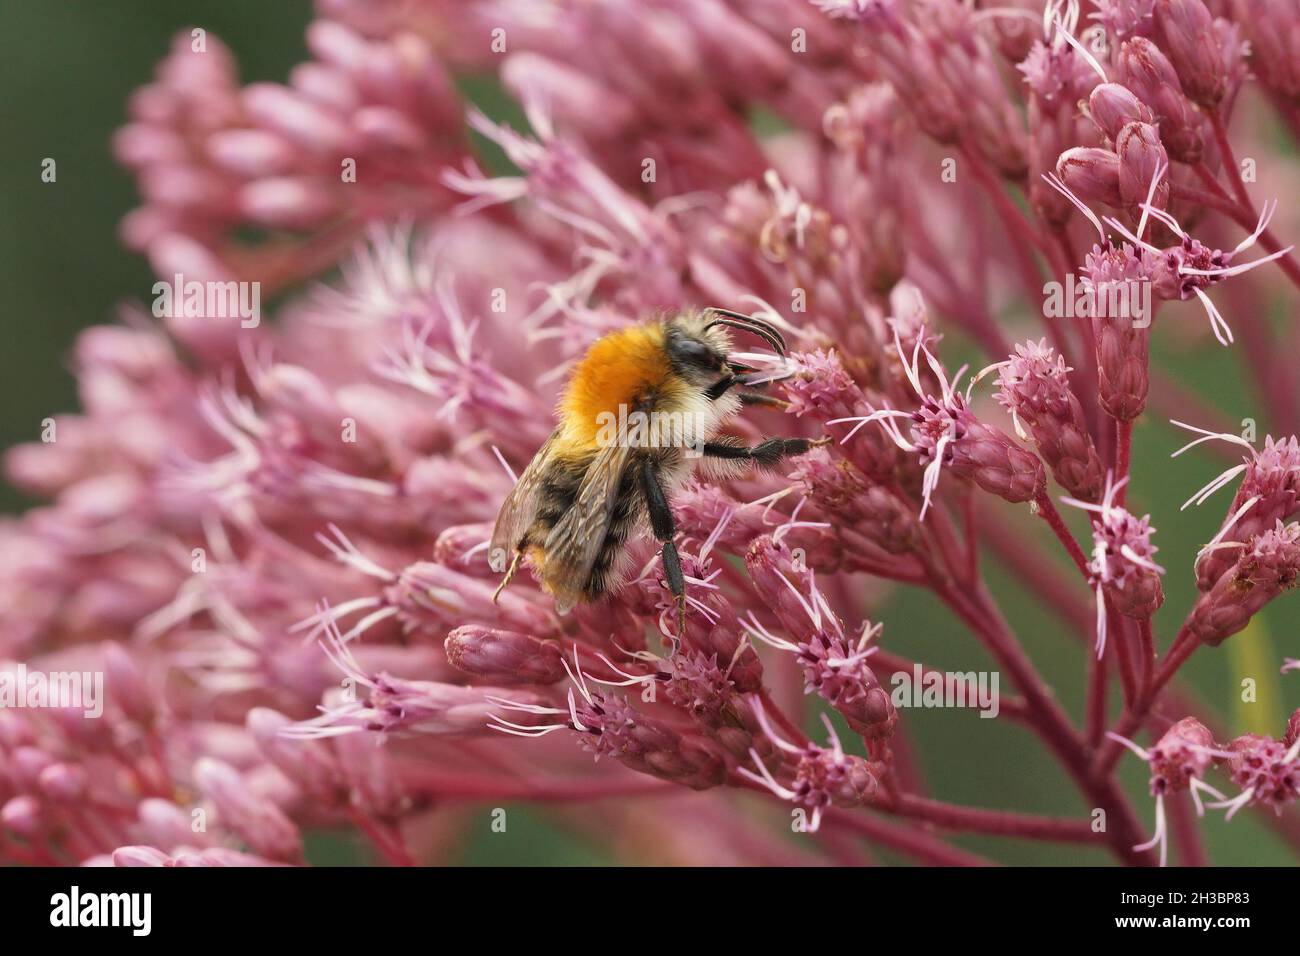 Closeup on the common carder bee, Bombus pascuorum, sitting Stock Photo